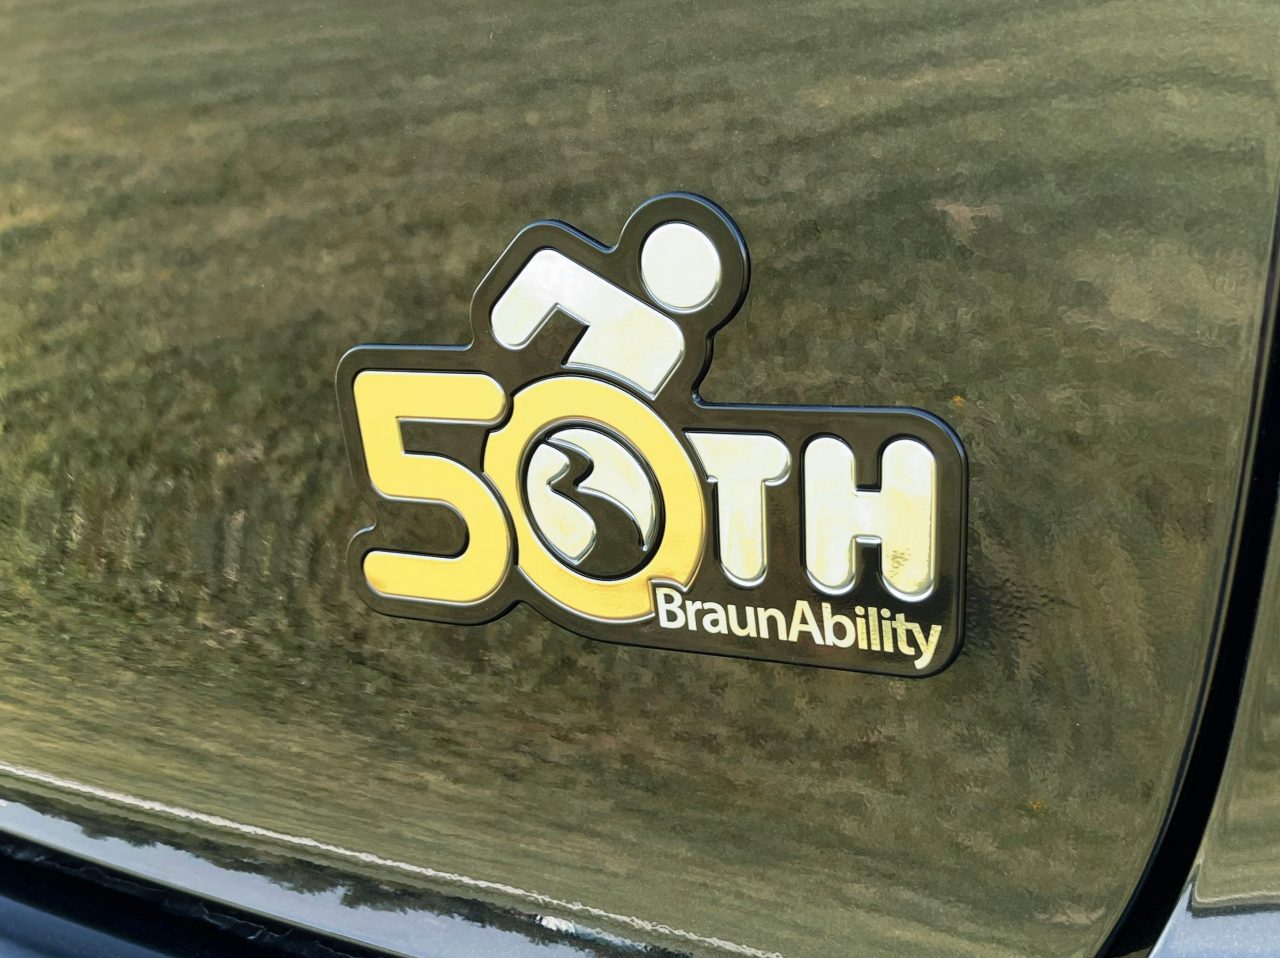 Closeup of the BraunAbility 50th anniversary logo badge on the outside door of the entervan